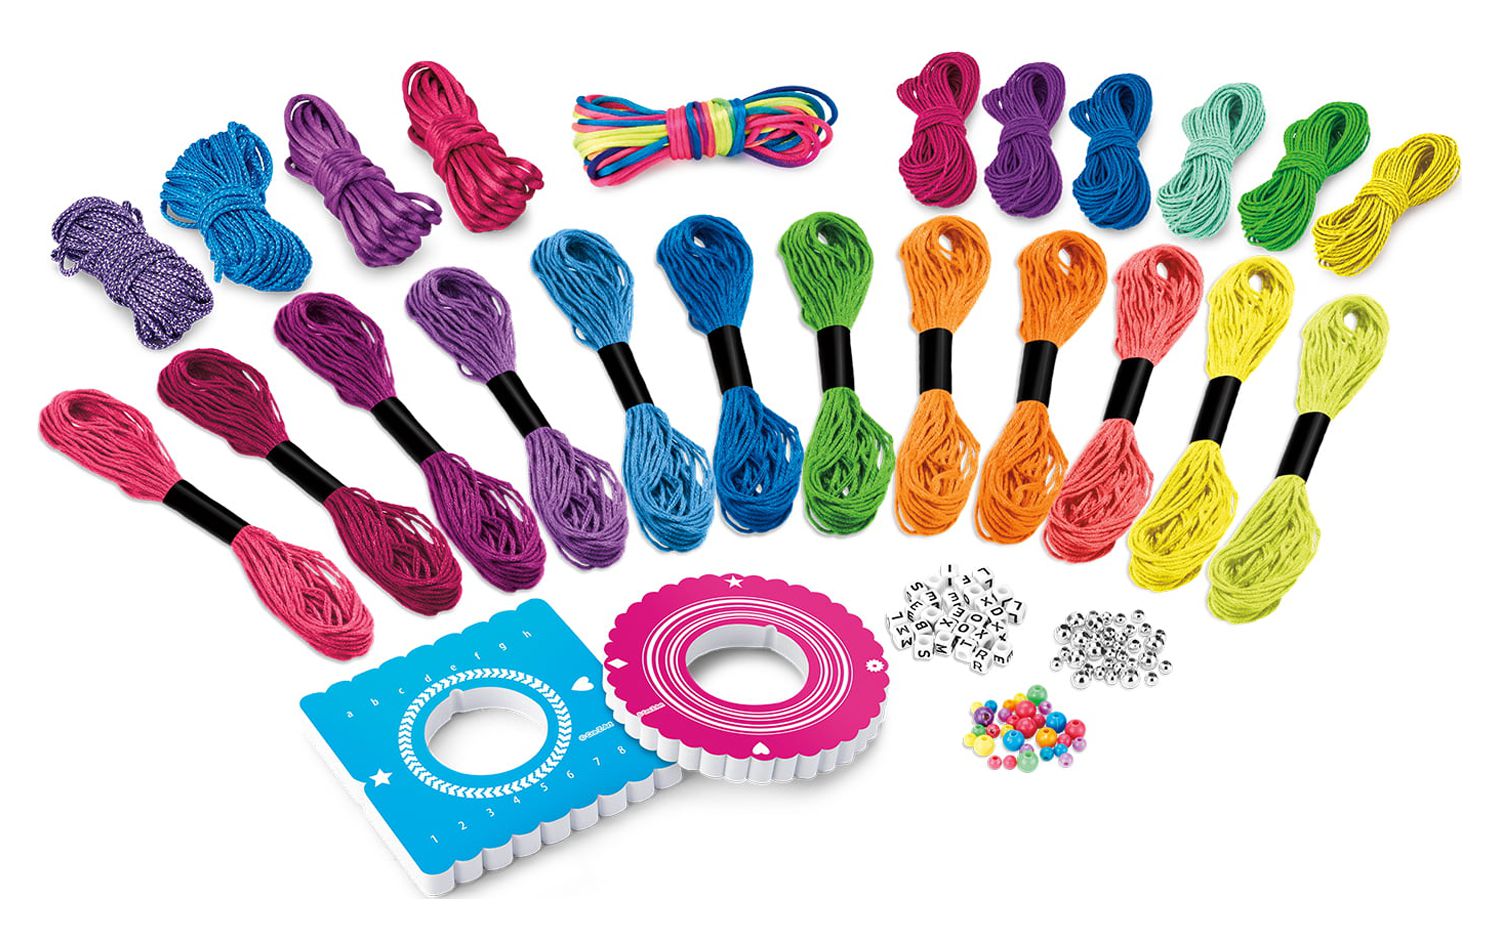 Cra-Z-Art Be Inspired 5-in-1 Friendship Bracelet Studio for Girls 6 Years of Age and Older - image 10 of 13